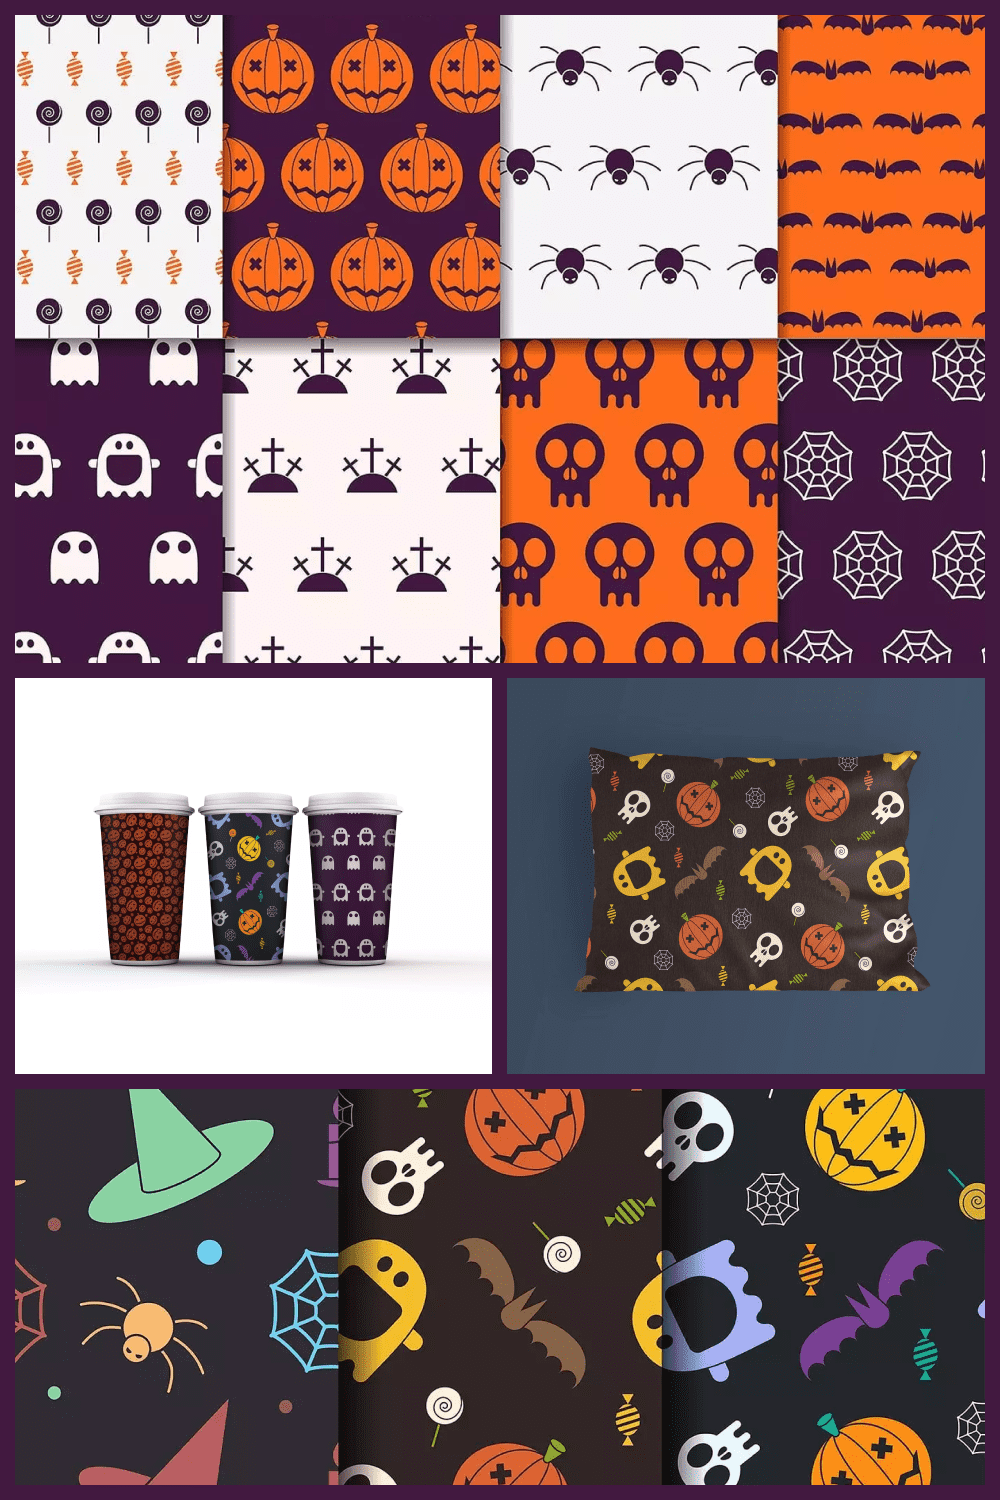 Collage of drawn bats, witches, cauldrons and ghosts on white, orange, purple and black backgrounds.